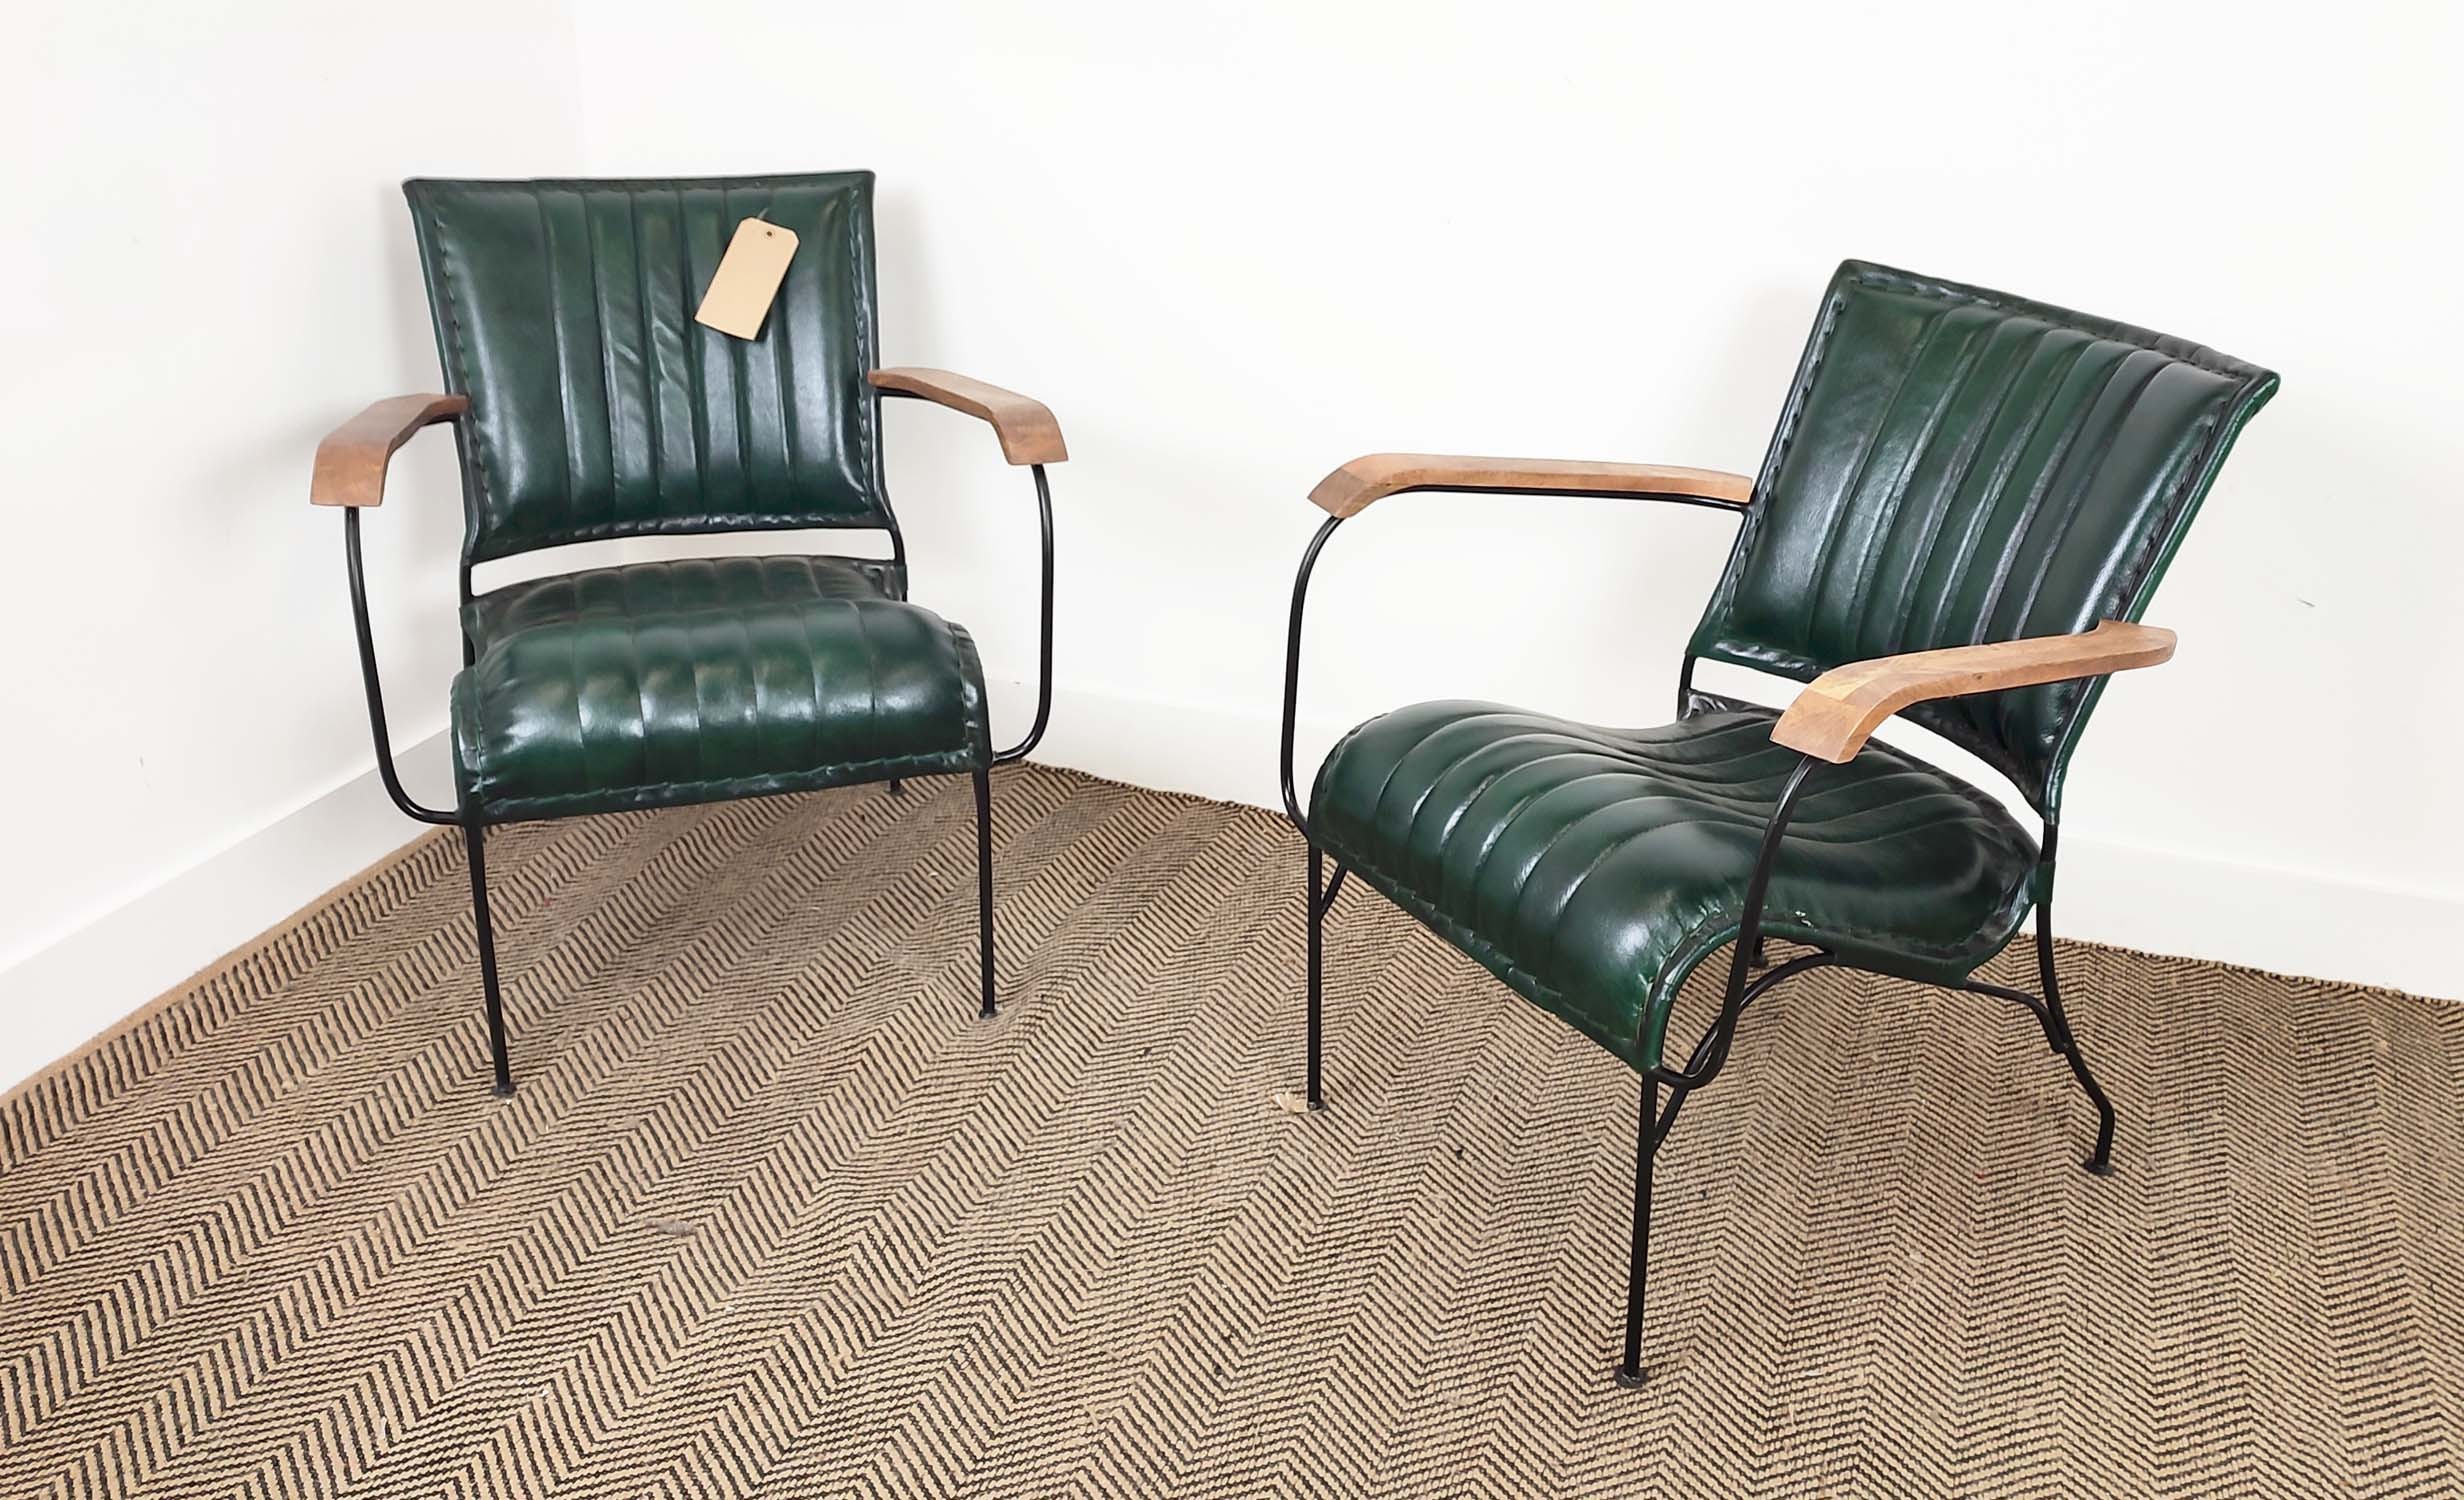 ARMCHAIRS, a pair, green leather upholstery with wooden arms and metal supports, 65cm x 75cm H x